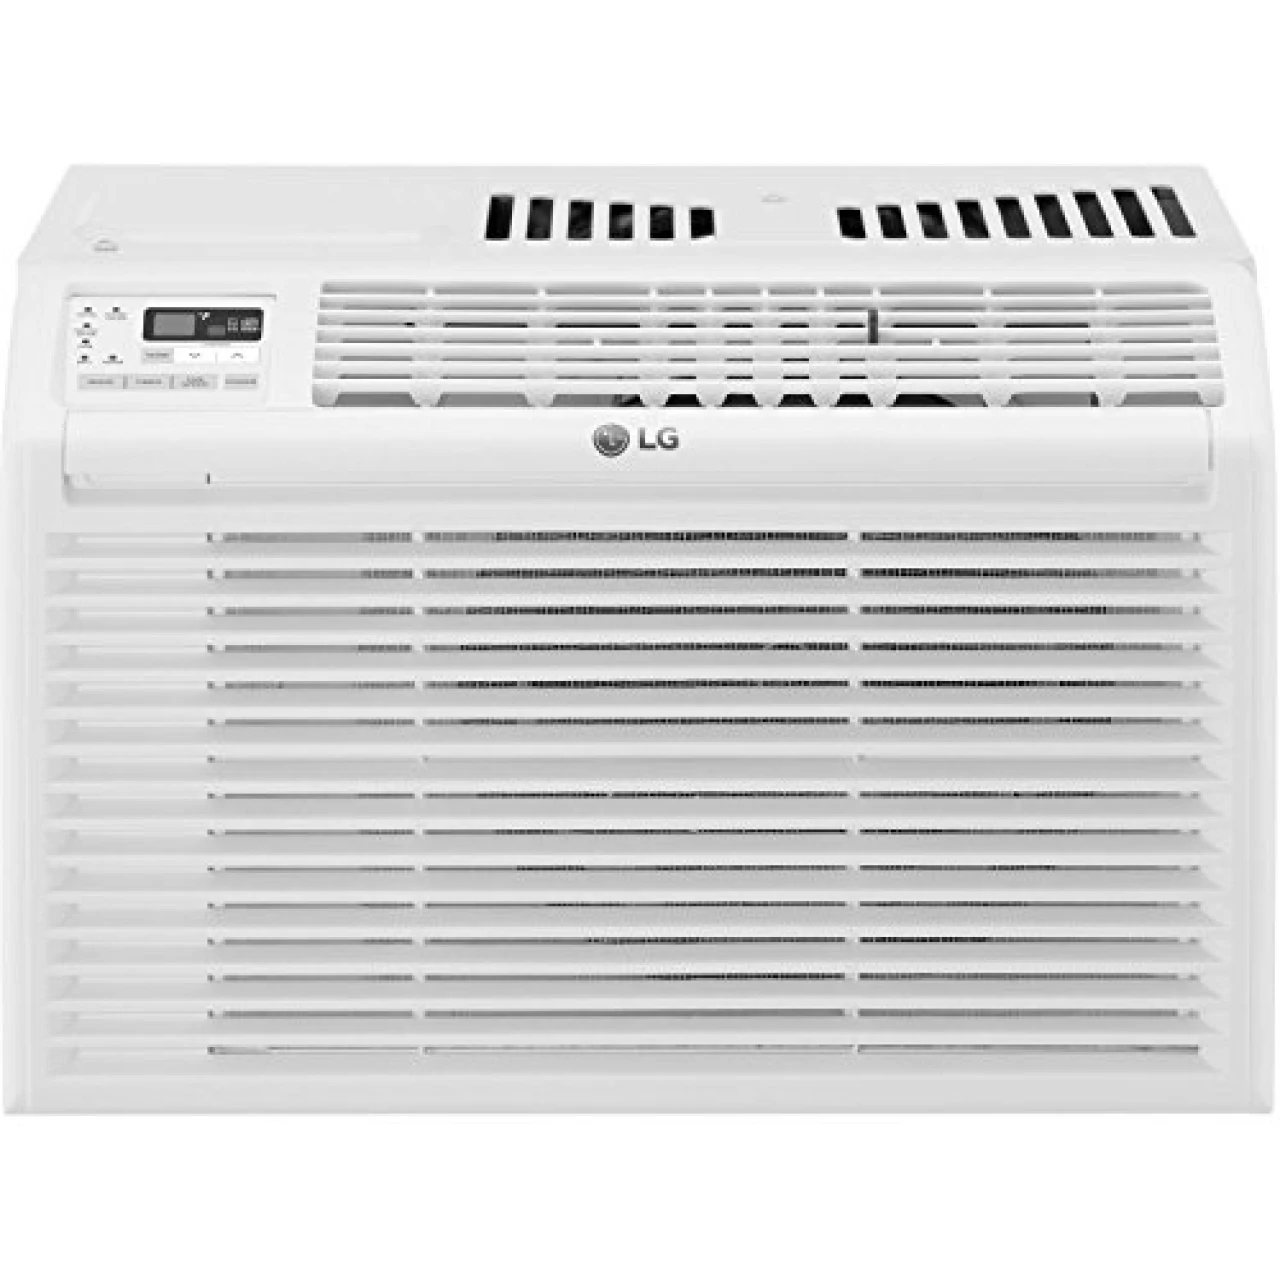 LG 6,000 BTU Window Conditioner, 250 Sq.Ft. (10&rsquo; x 25&rsquo; Room Size), Quiet Operation, Electronic Control